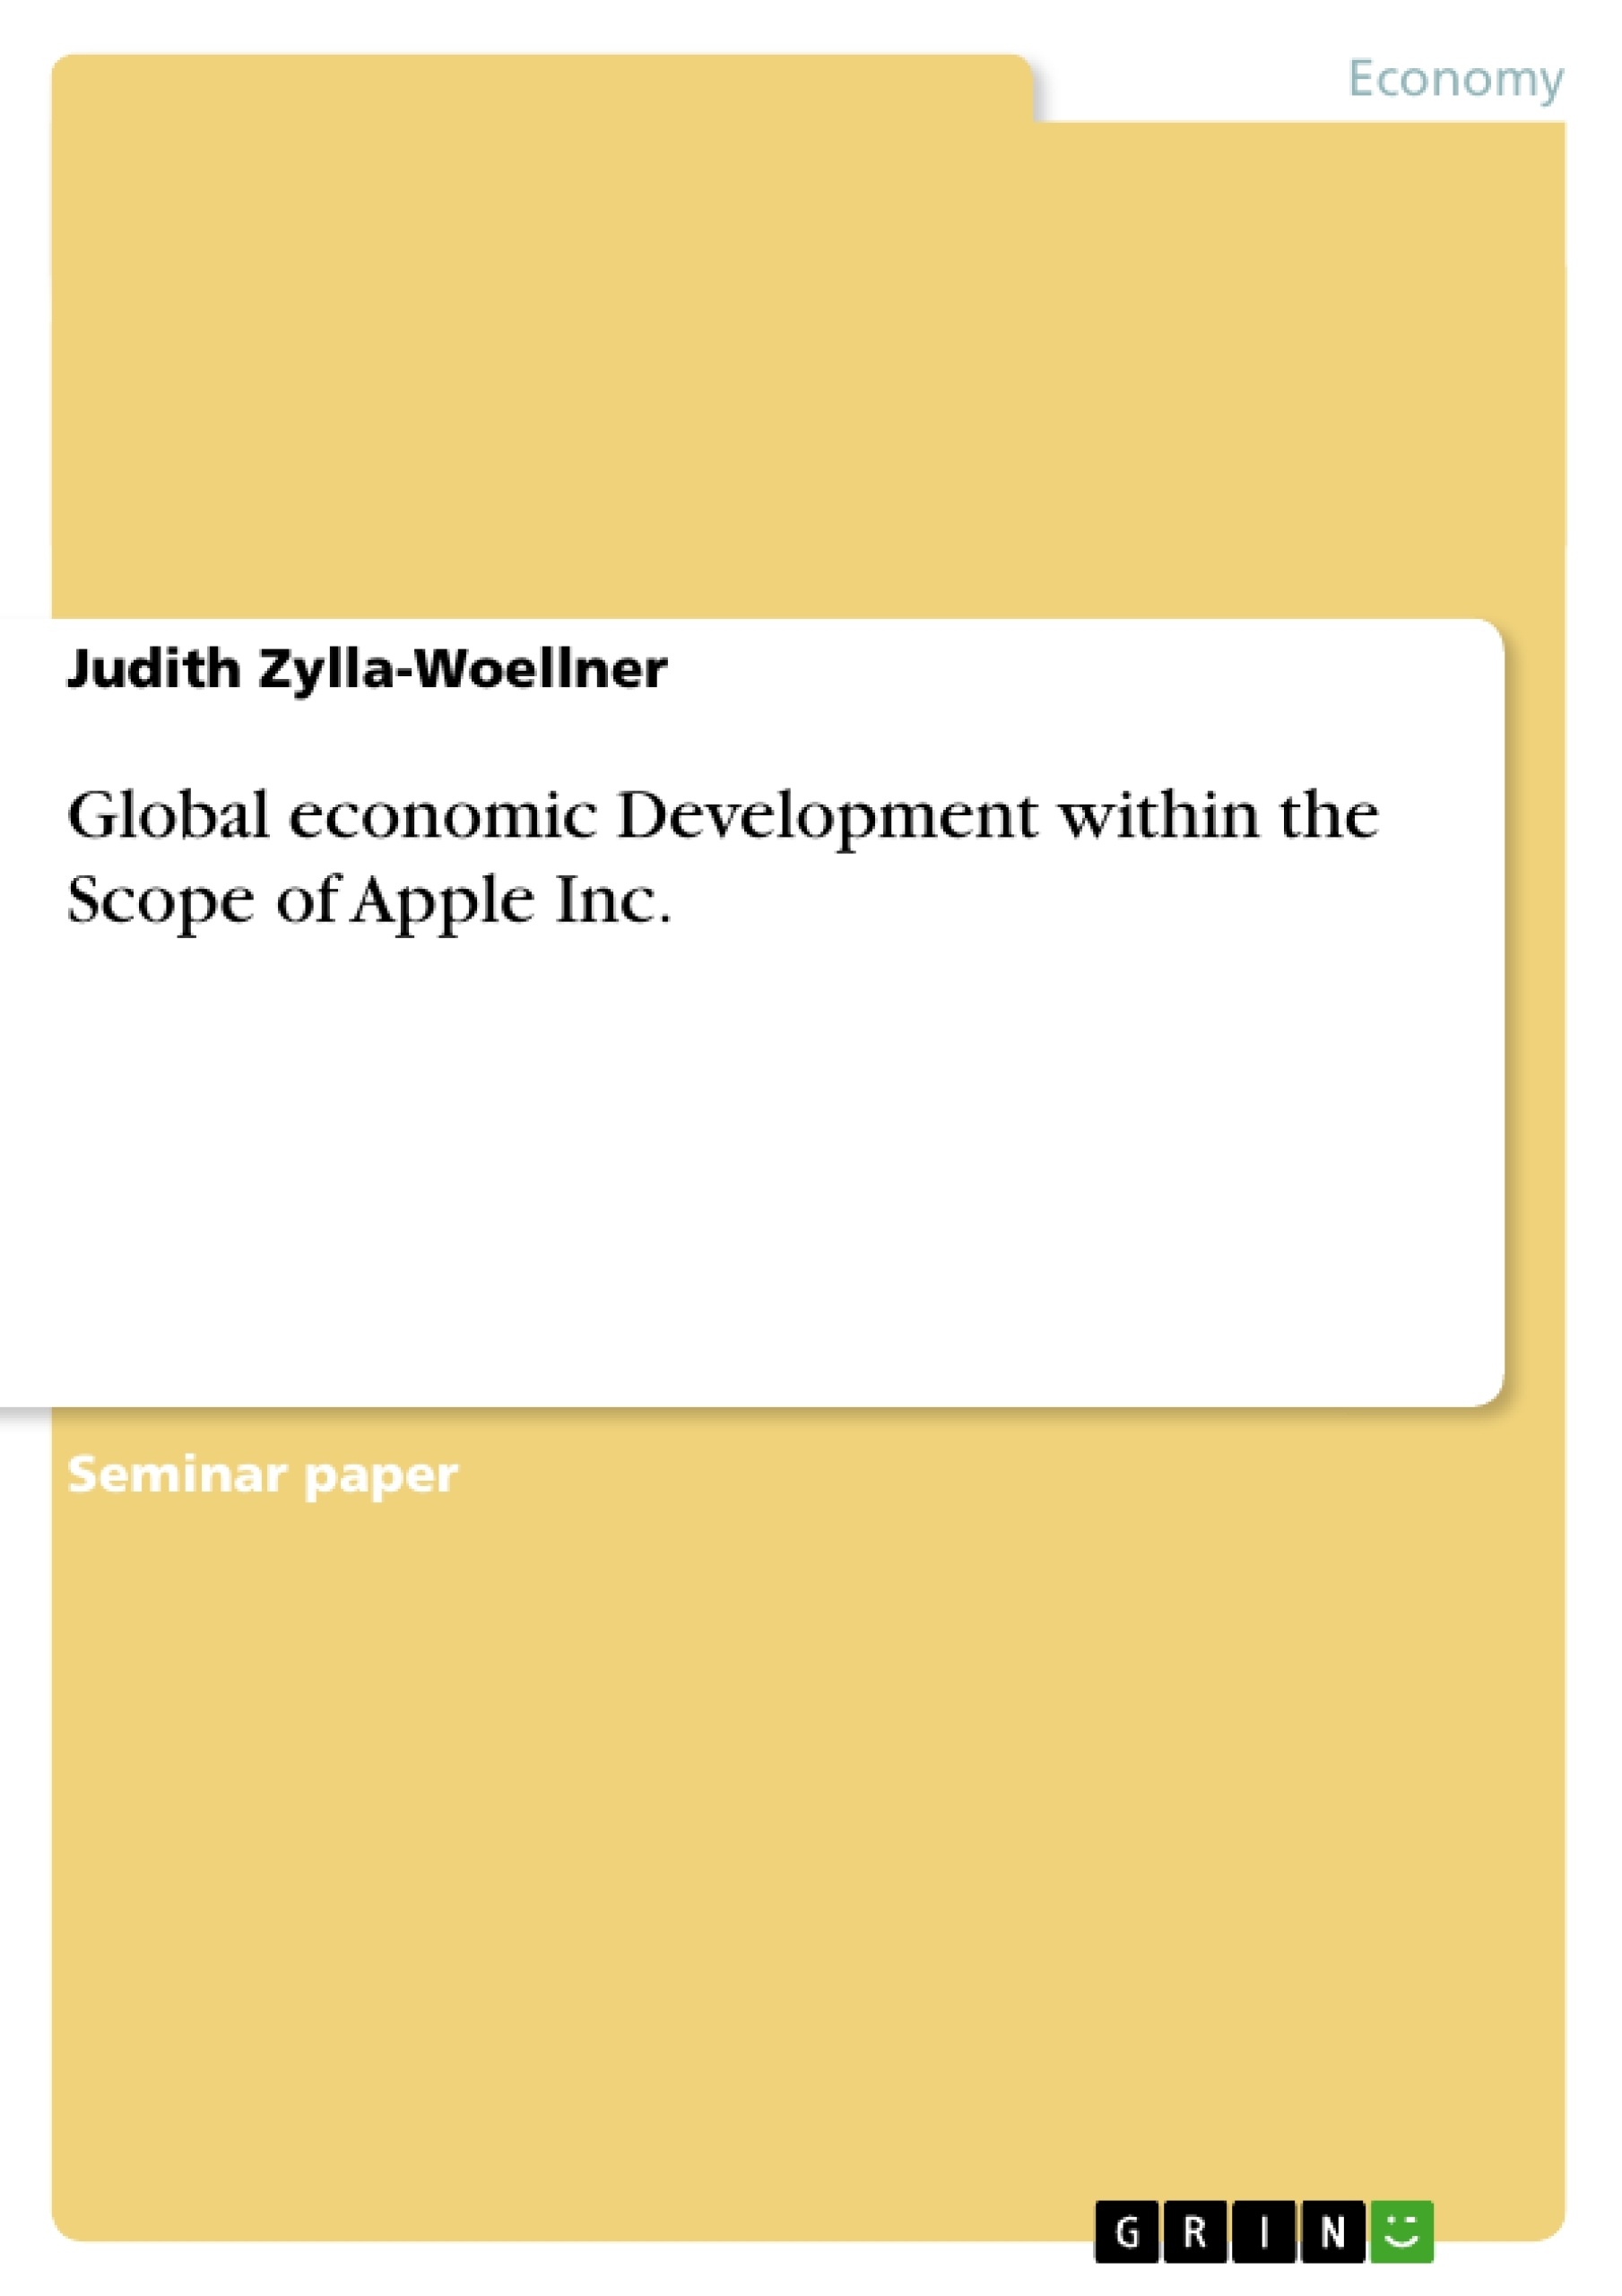 Título: Global economic Development within the Scope of Apple Inc.